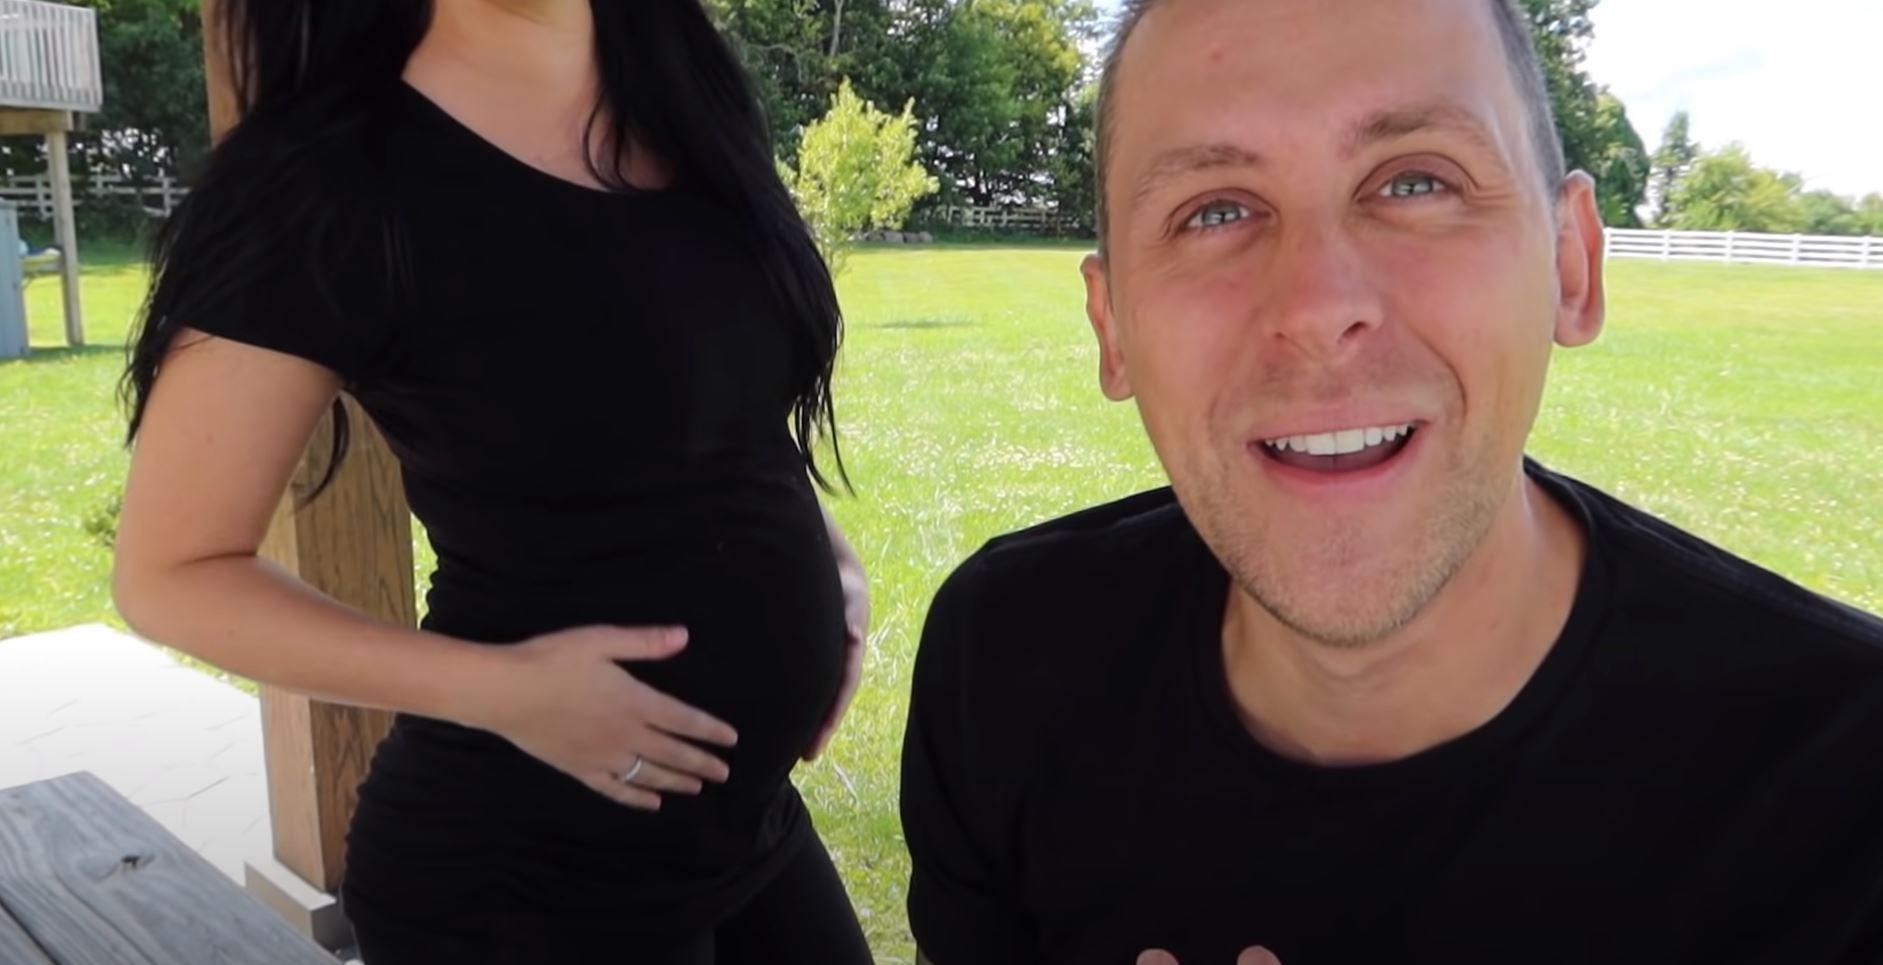 YouTuber Roman Atwood and his wife, Brittney, show off her 4-month baby bump after revealing the good news!